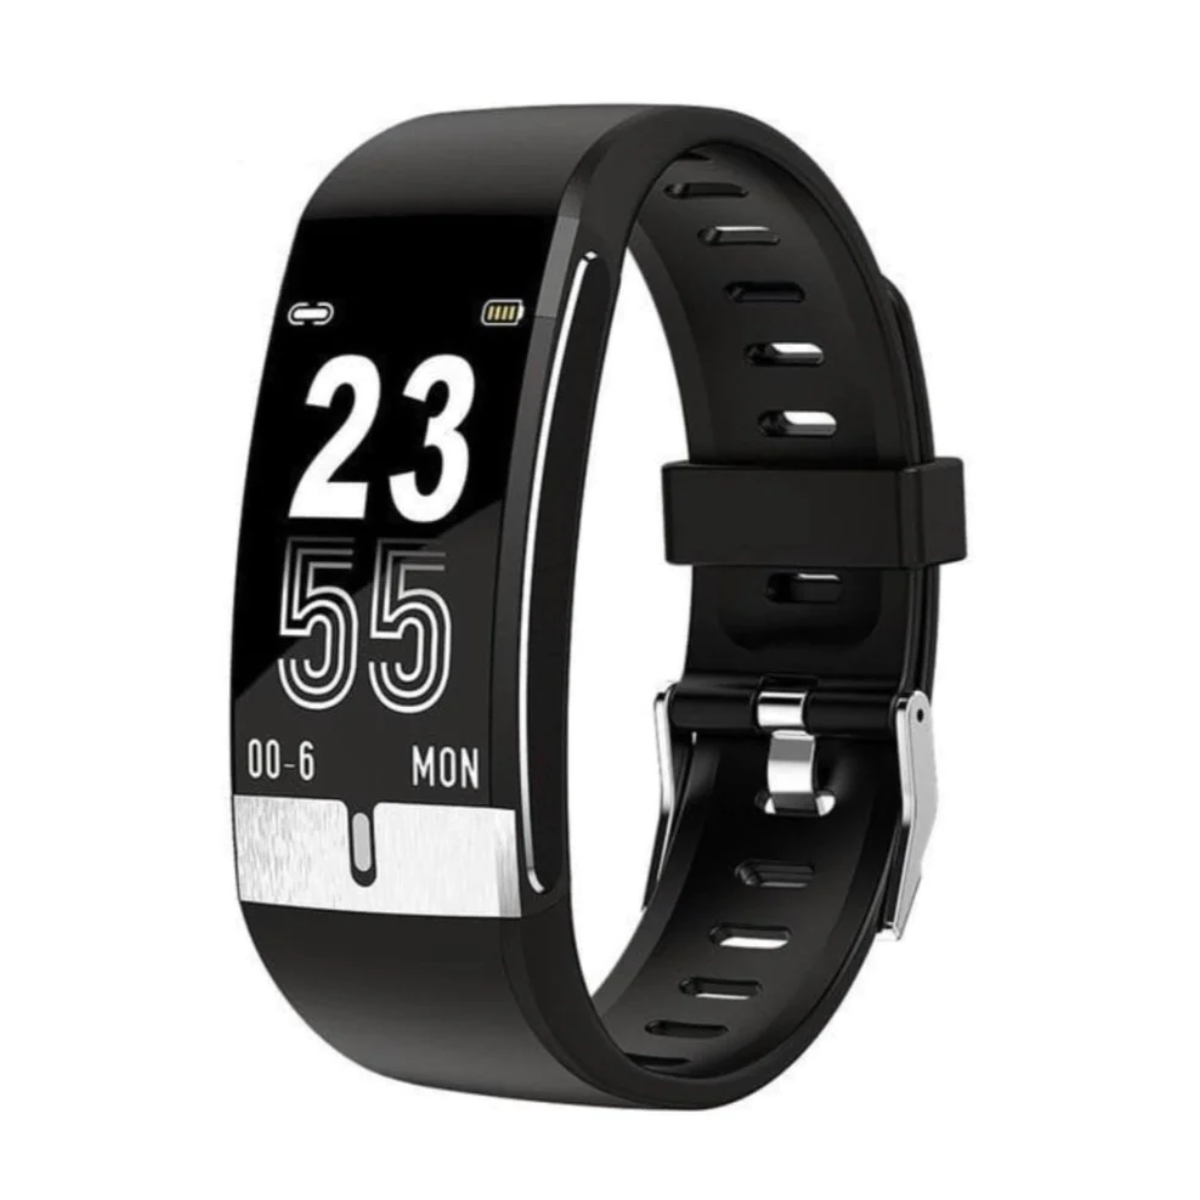 15. Stay Fit and Stylish: The Ultimate Fitness Tracker Watch for Him